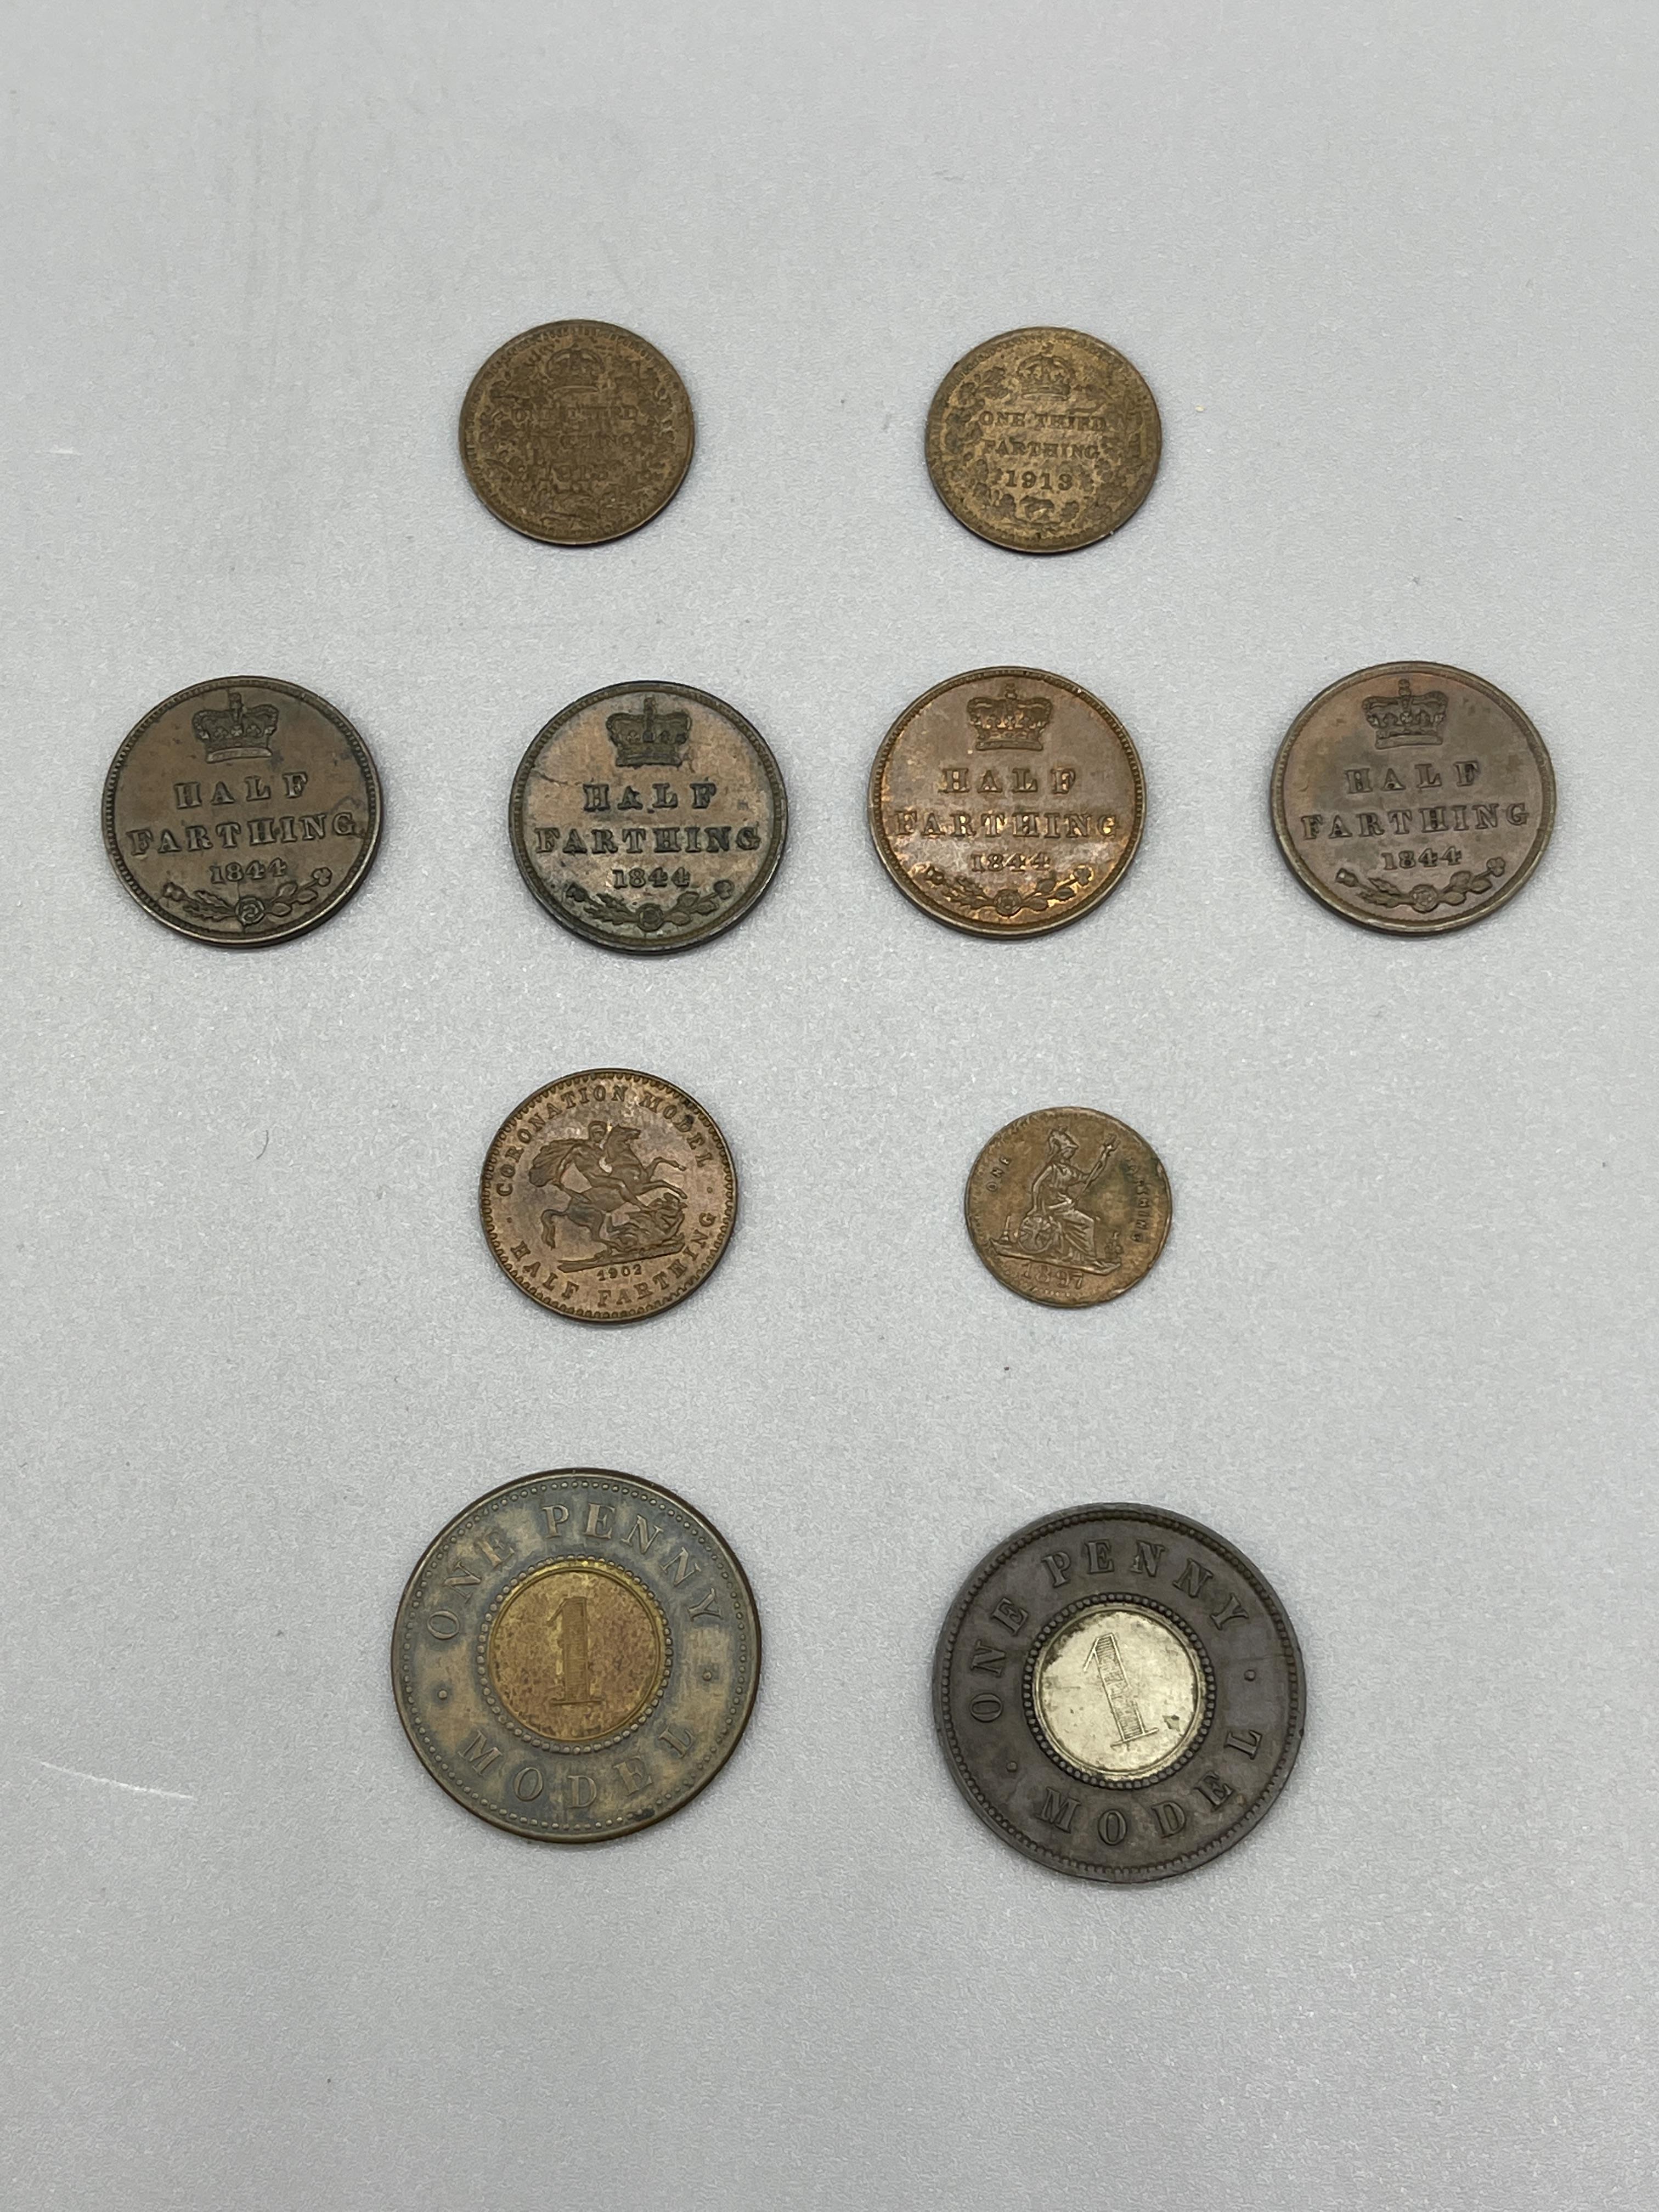 High grade Half and third farthings and model coin